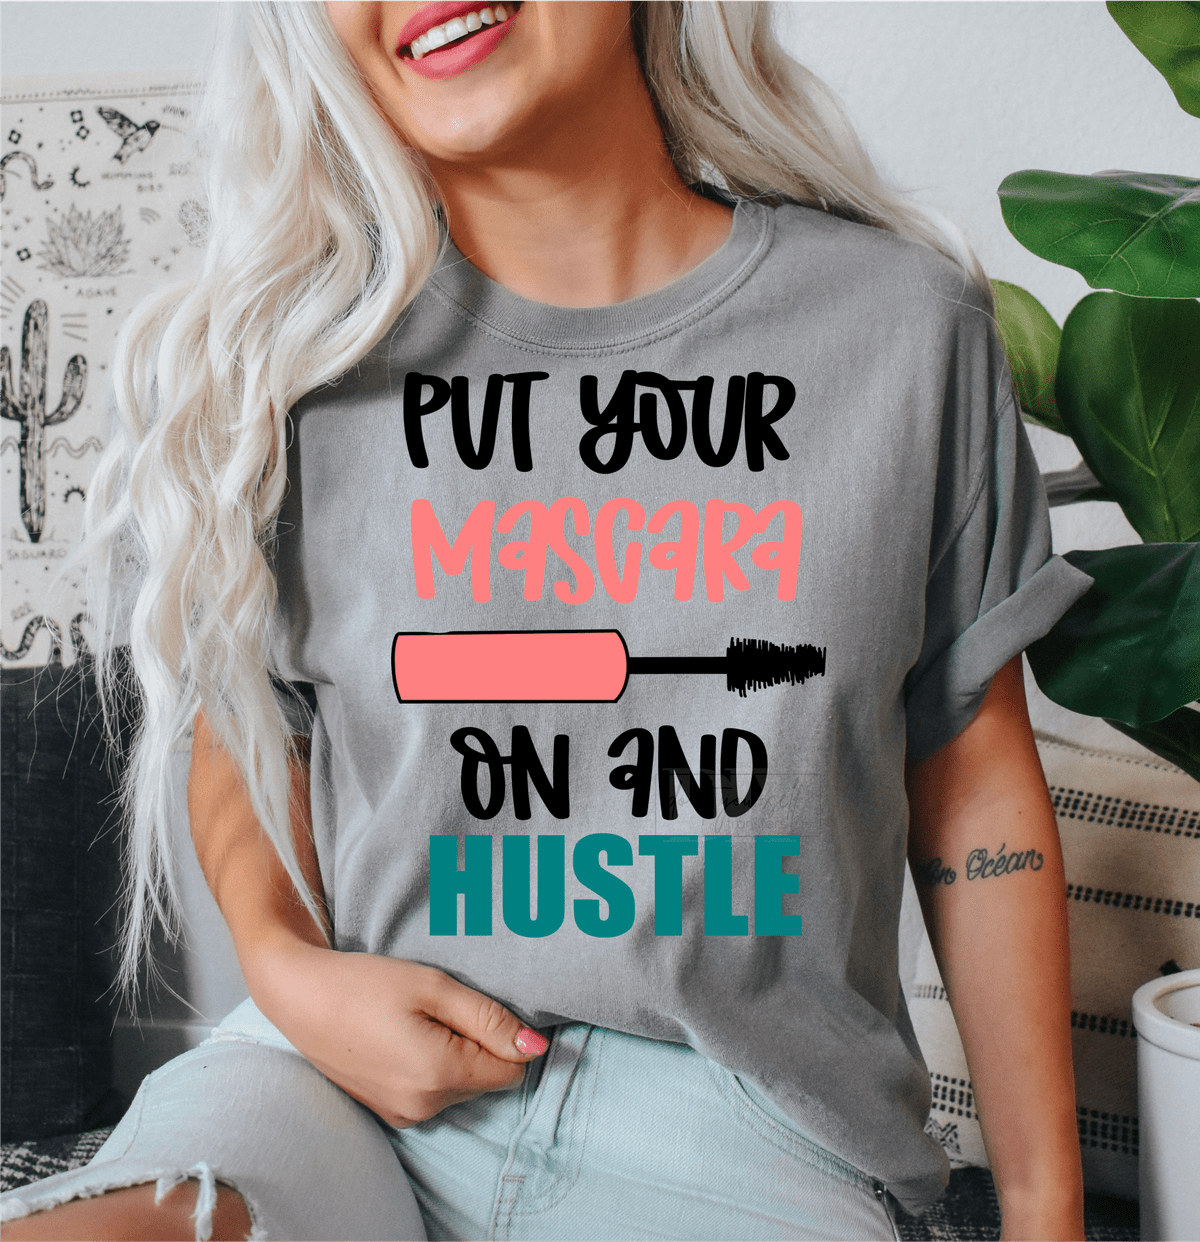 Put your mascara on and Hustle make up size ADULT DTF TRANSFERPRINT TO ORDER - Do it yourself Transfers